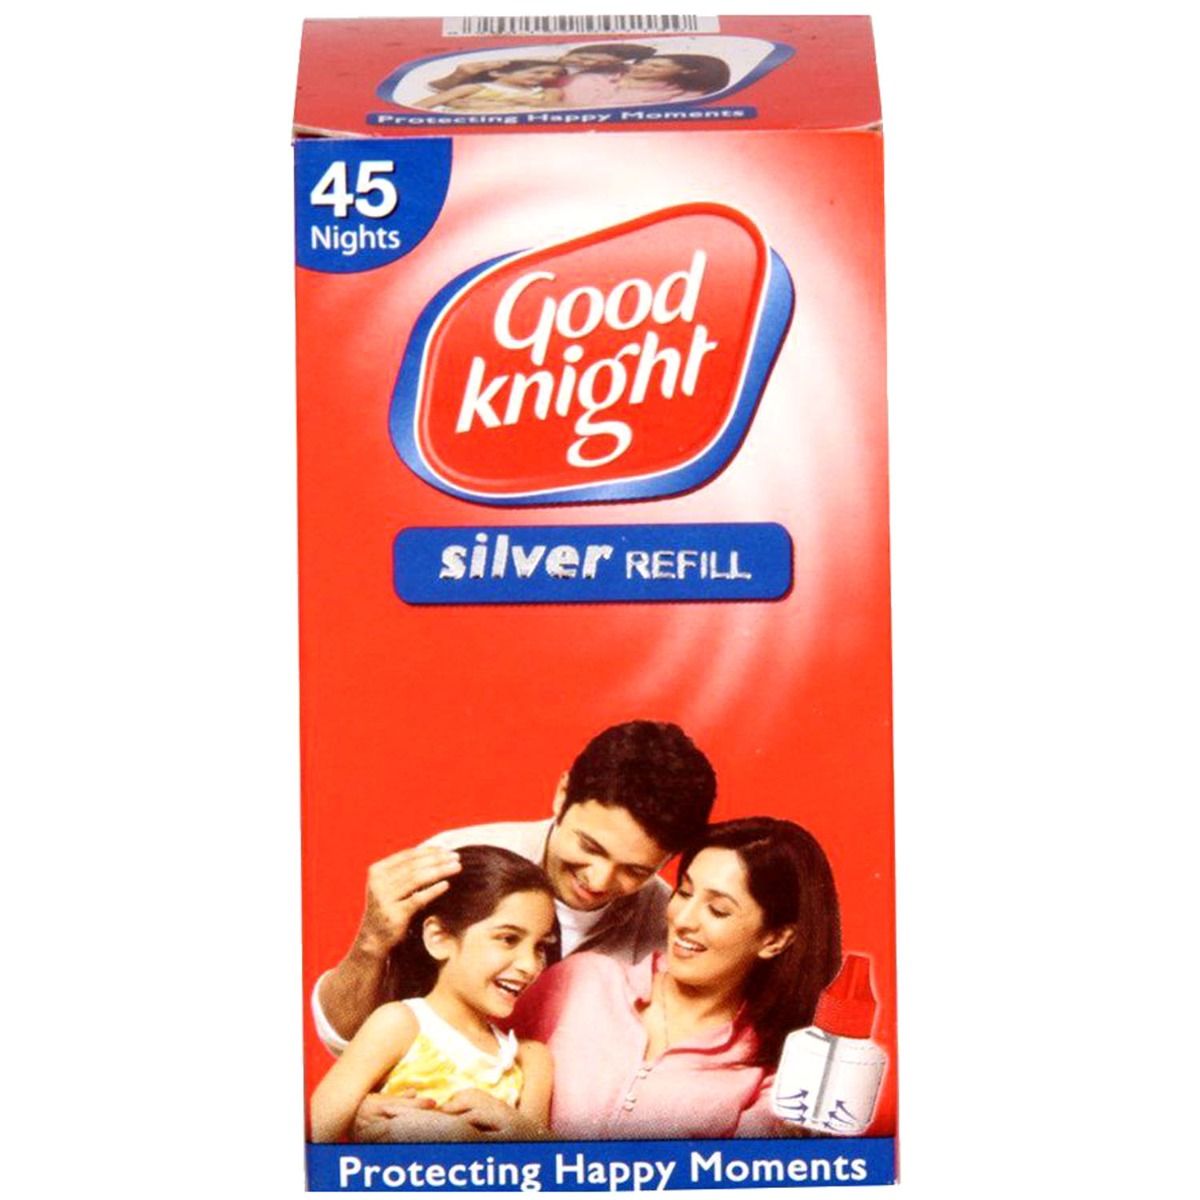 Good Knight Silver Refill 45 Nights, Pack of 1 